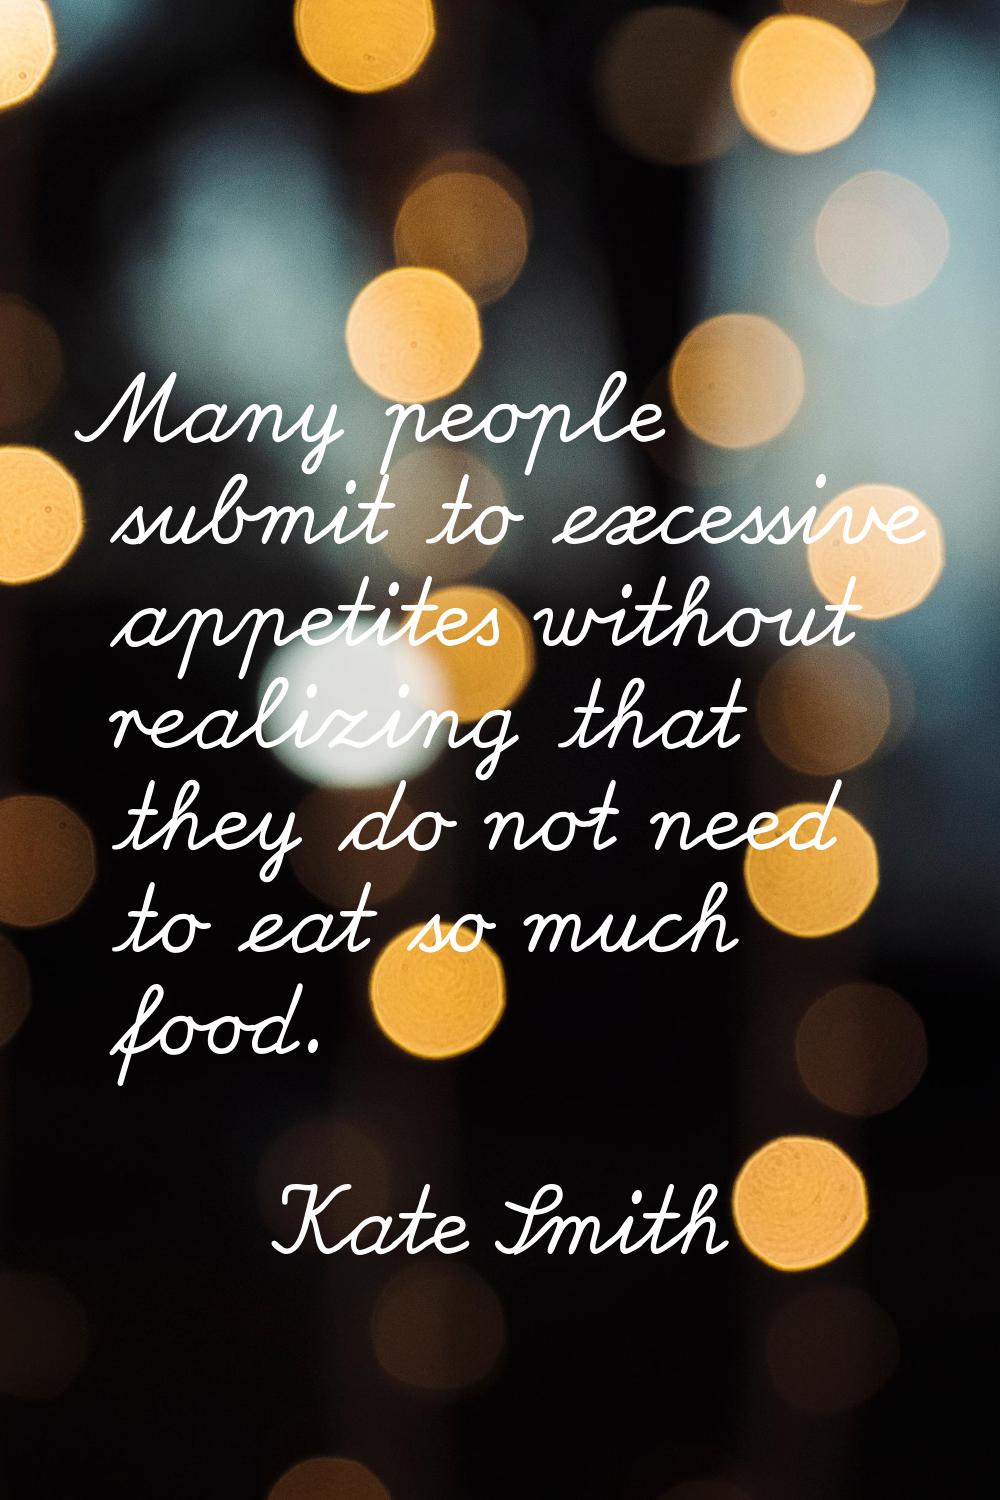 Many people submit to excessive appetites without realizing that they do not need to eat so much fo